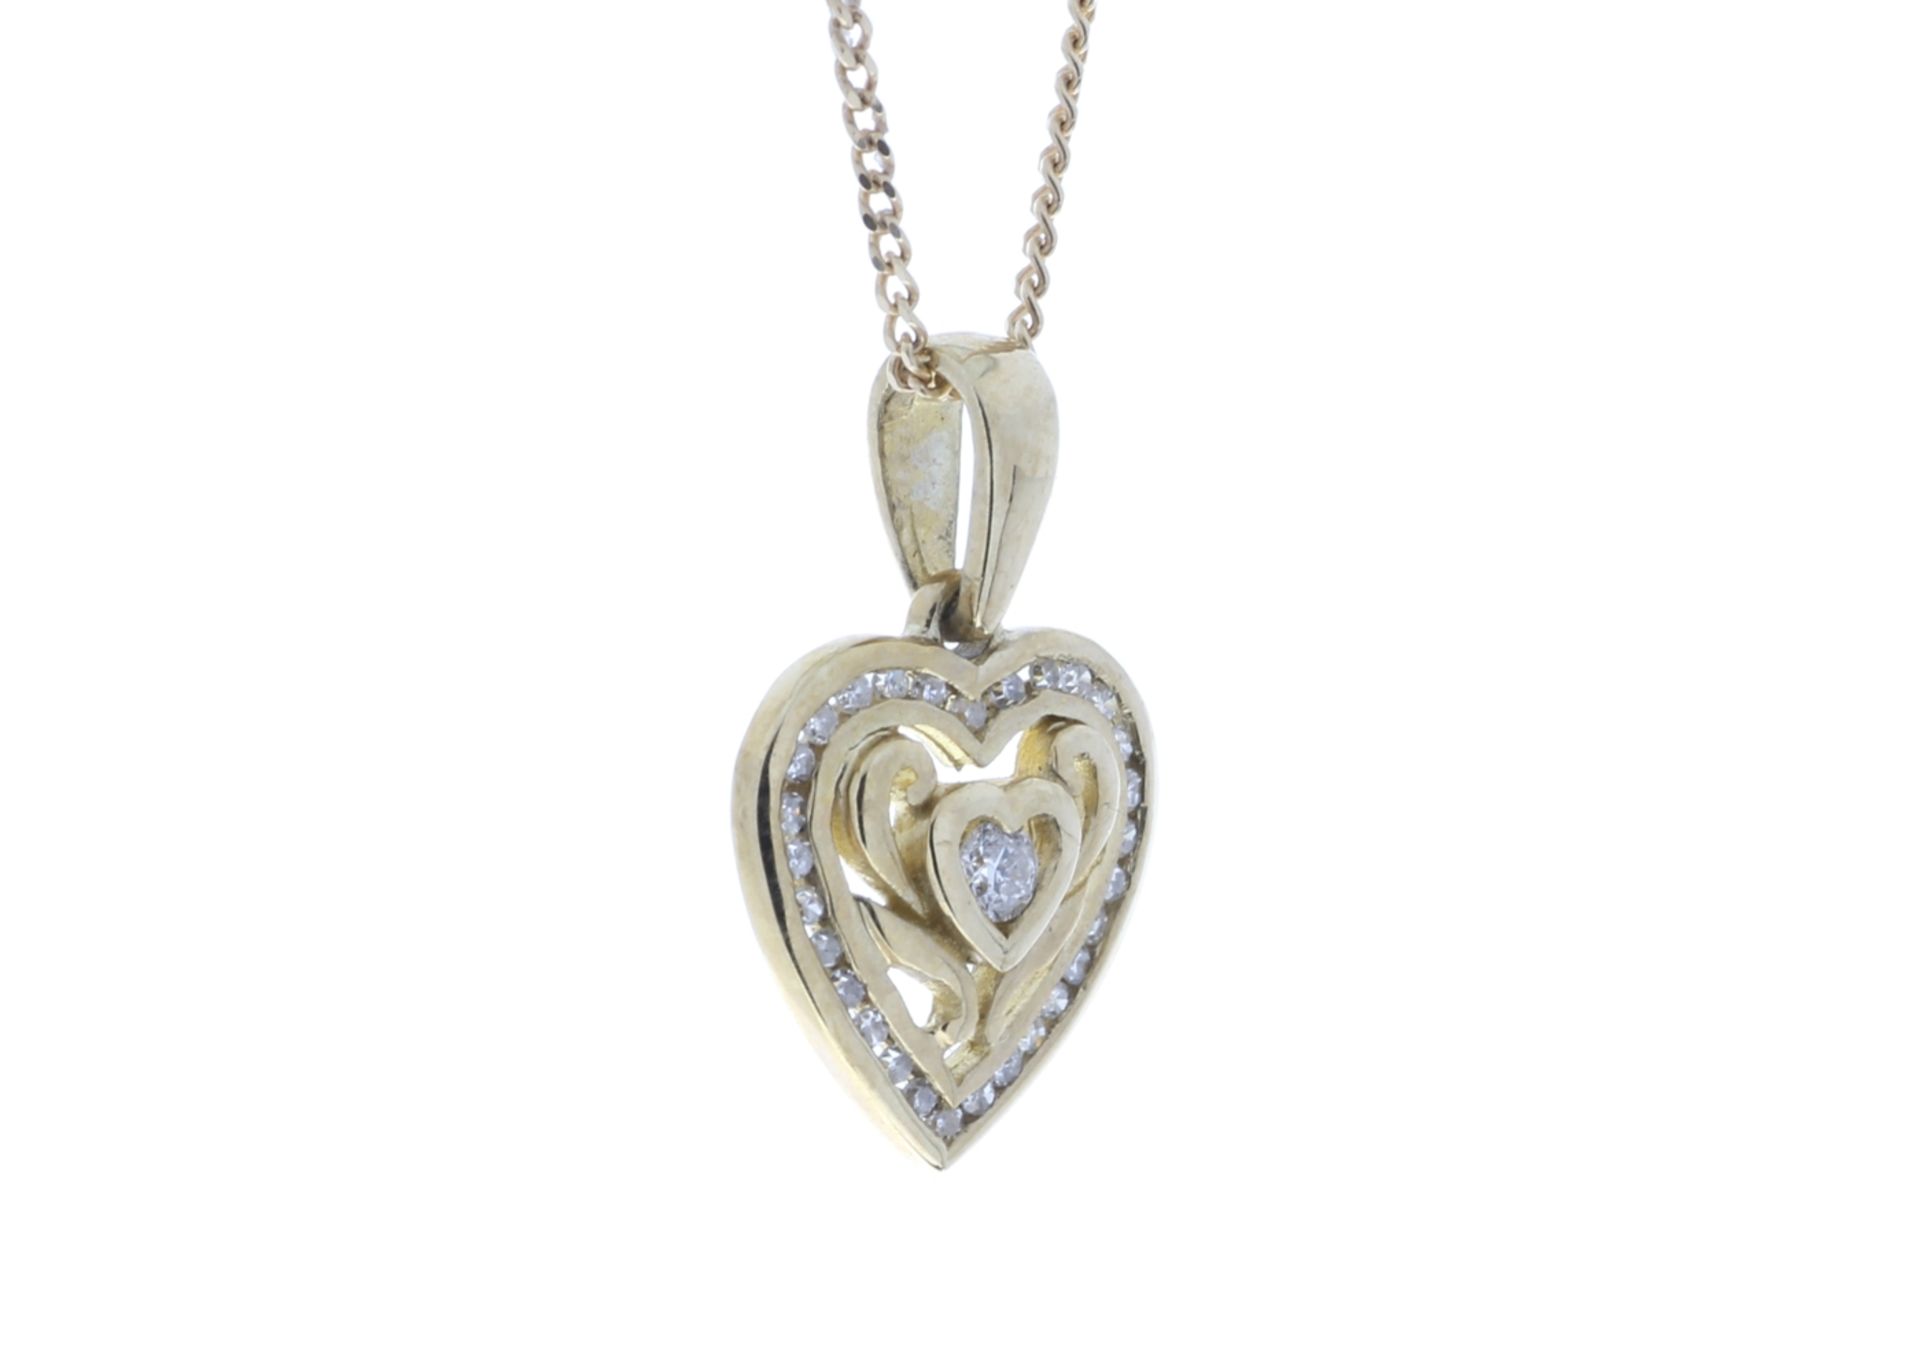 ***£1,740.00*** Certified by GIE 9ct Yellow Gold Heart Pendant Set With Diamonds With Centre Heart - Image 2 of 5